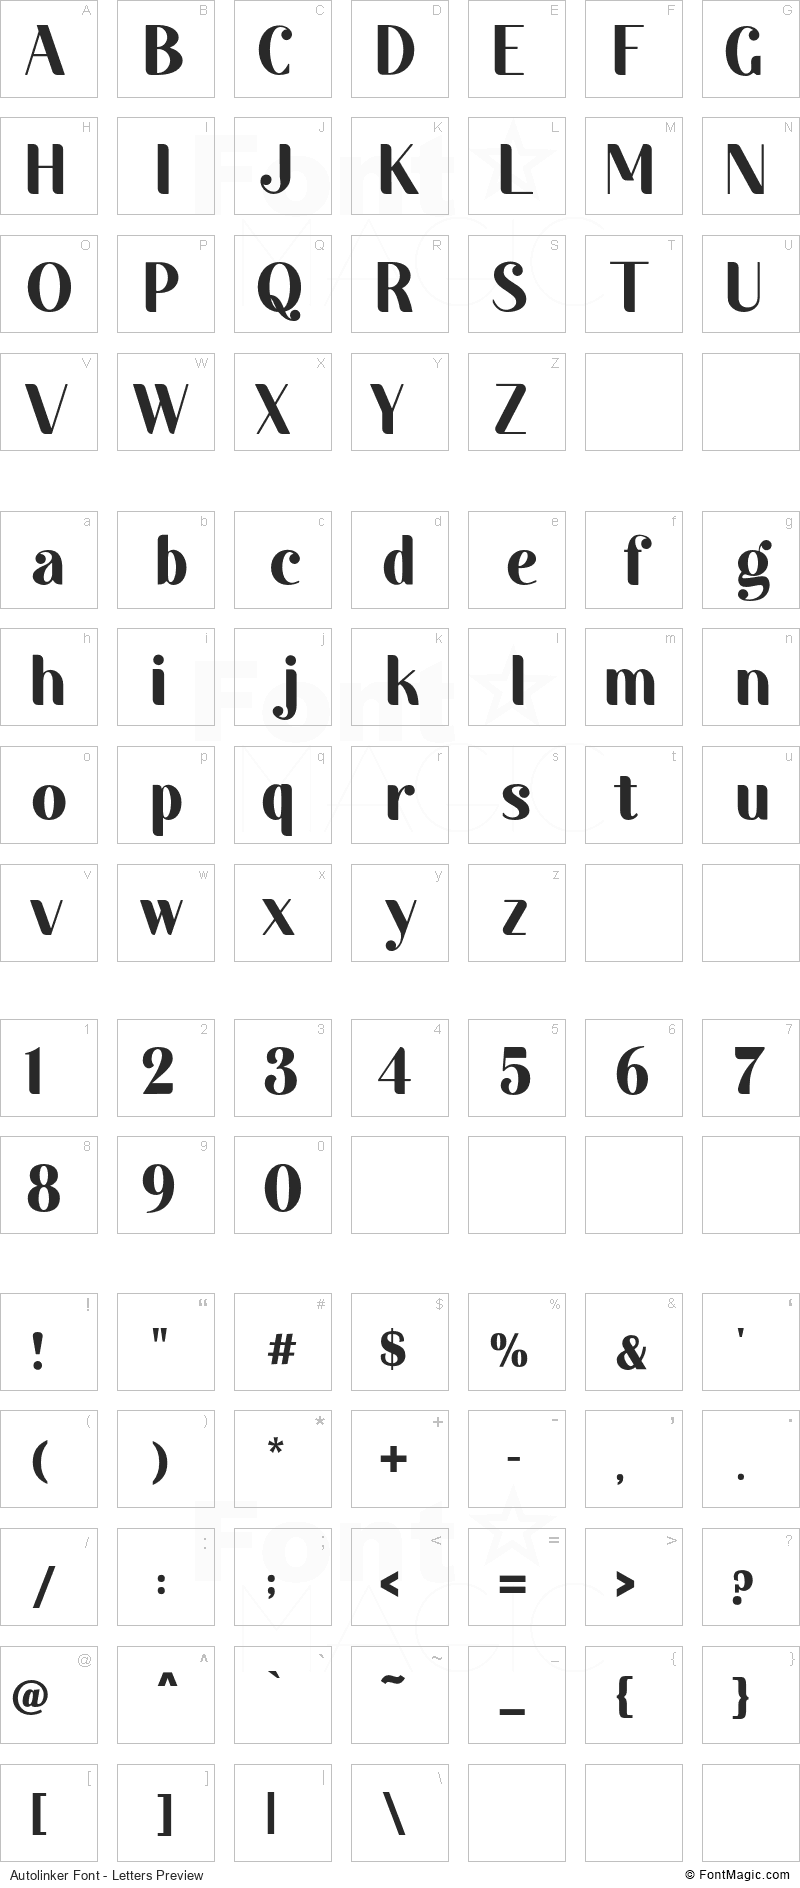 Autolinker Font - All Latters Preview Chart